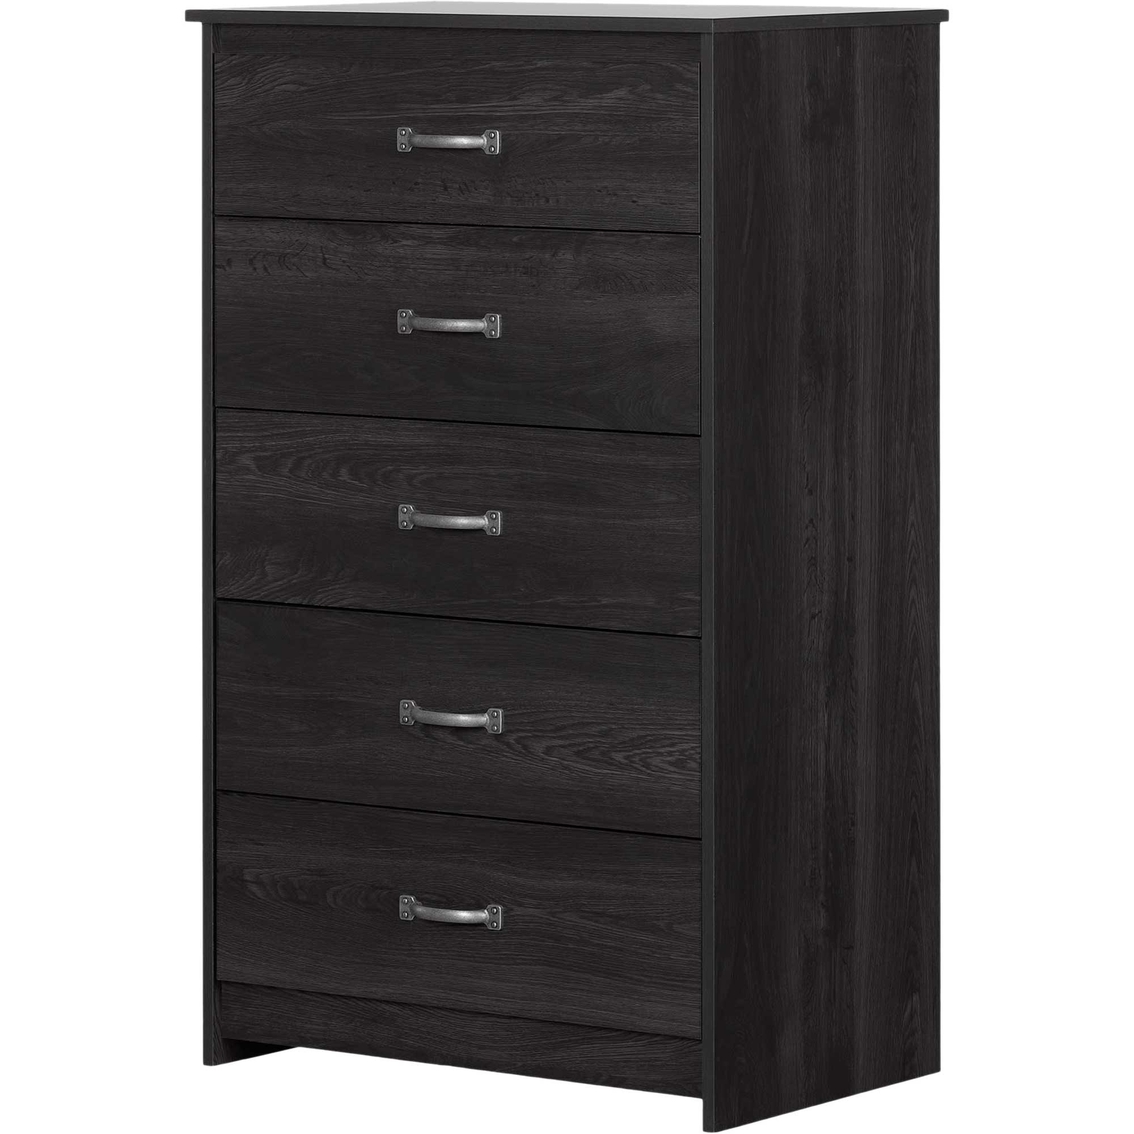 South Shore Tassio 5 Drawer Chest | Dressers | Furniture & Appliances ...